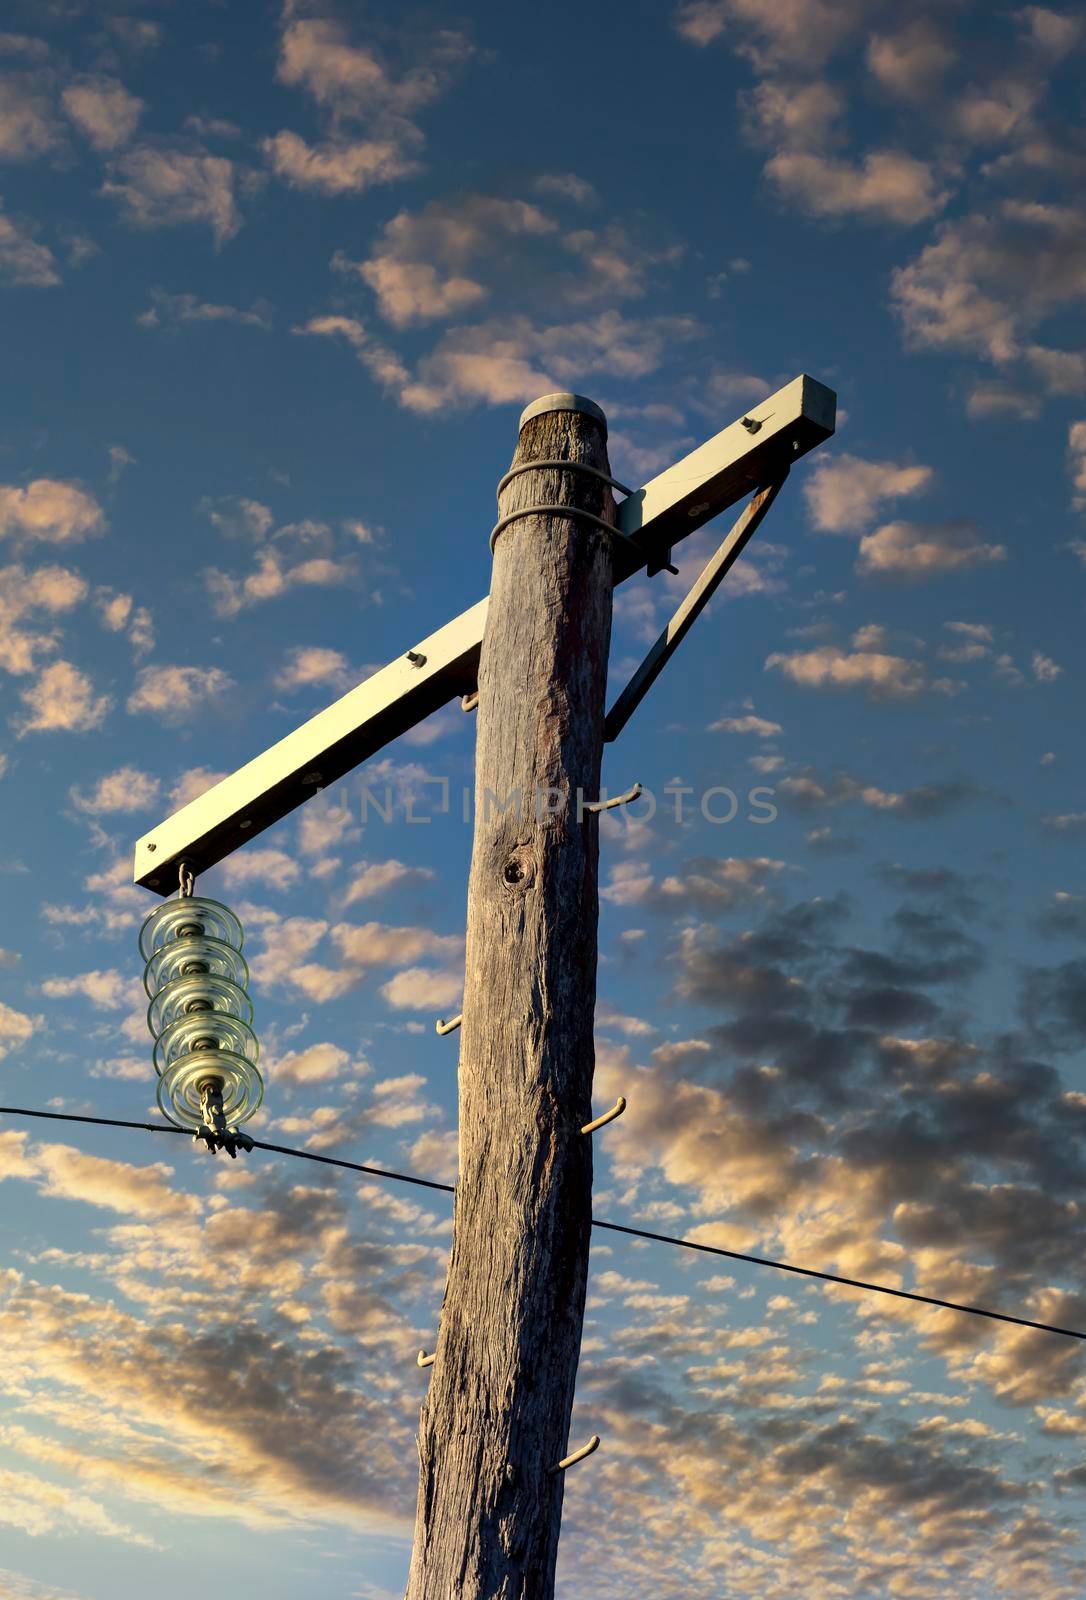 Photograph of a wooden telephone post and cables against a blue sky